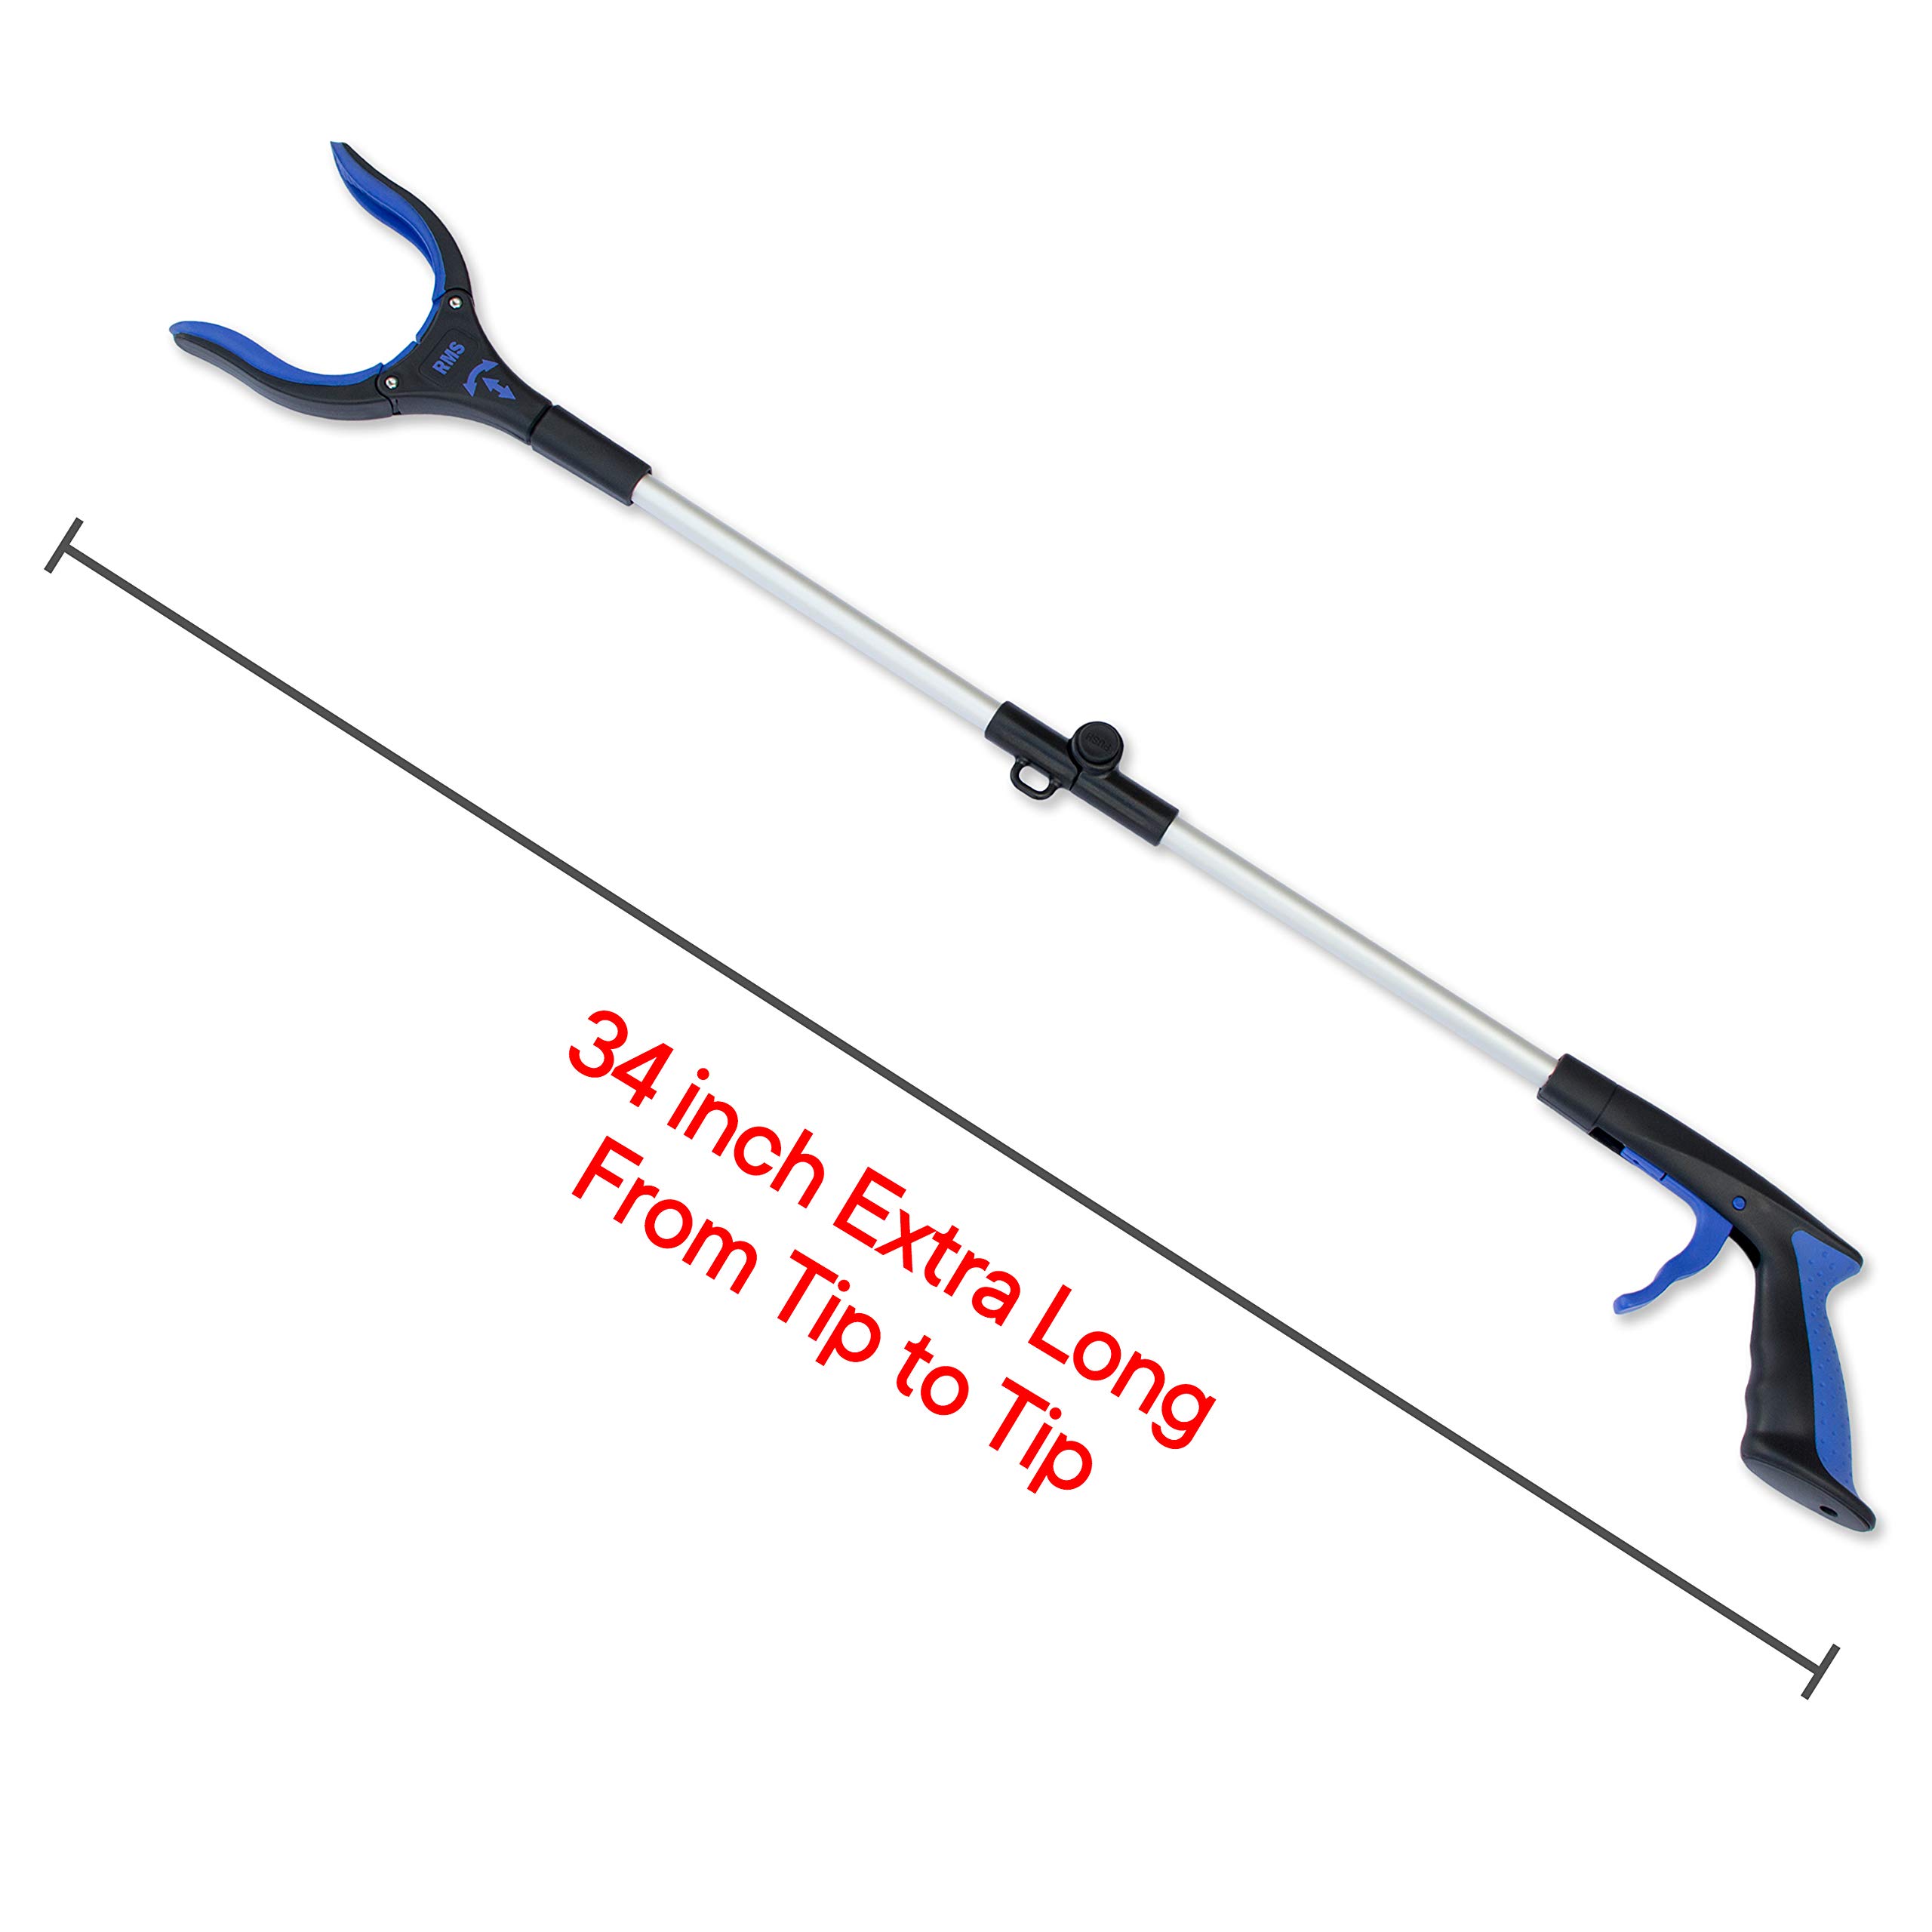 RMS 34 Inch Extra Long Reacher Grabber - Foldable Gripper and Reaching Tool with Rotating Jaw